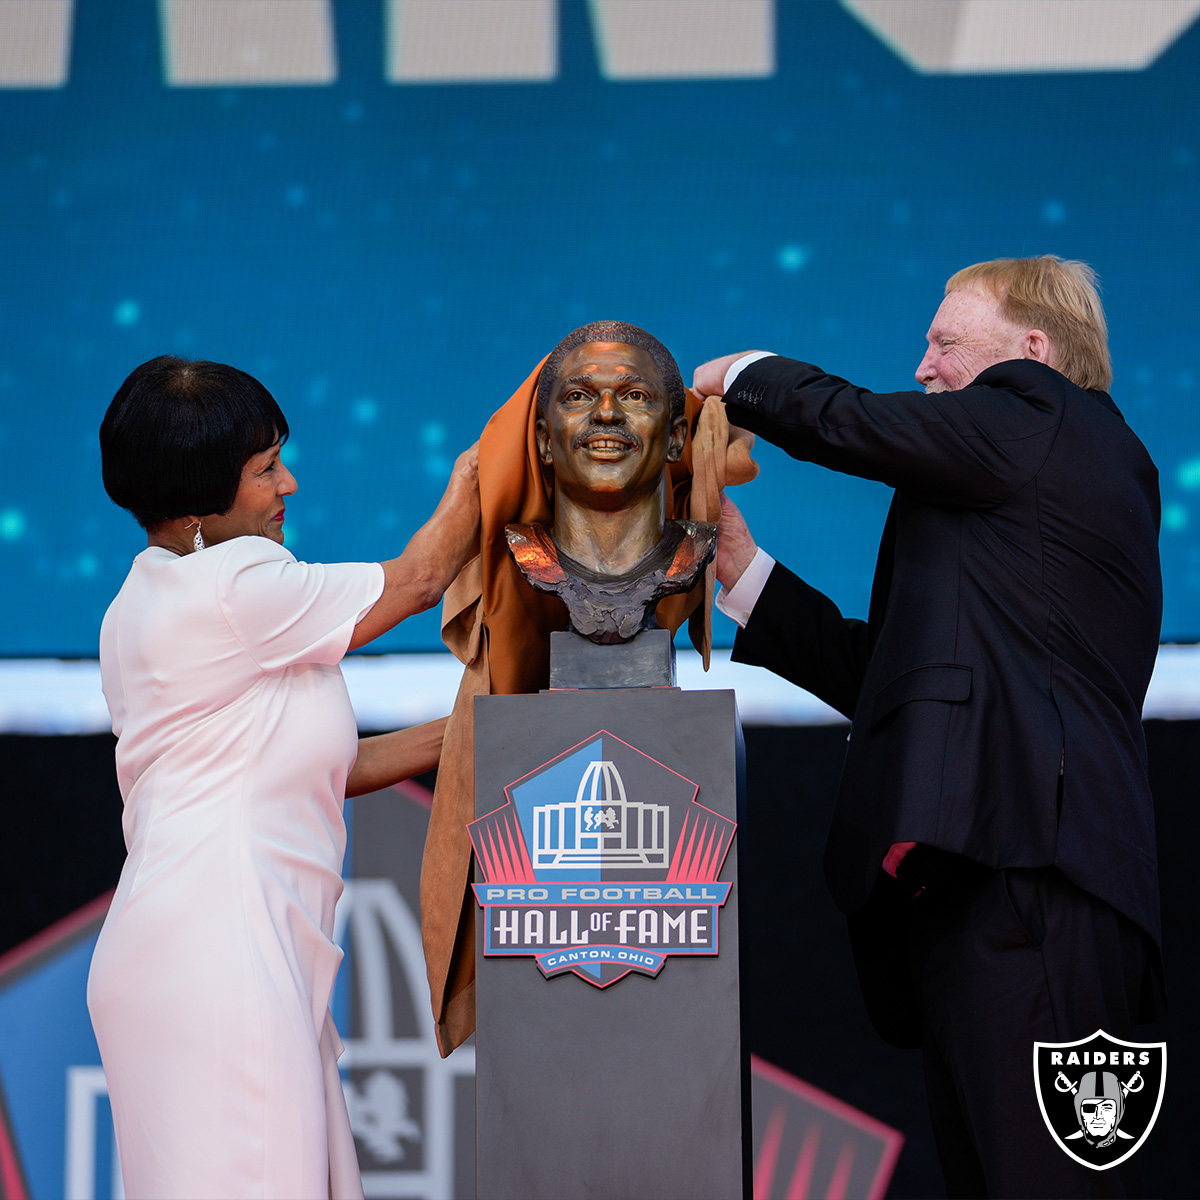 Watch: Raiders legendary WR Cliff Branch official induction into Pro Football Hall of Fame